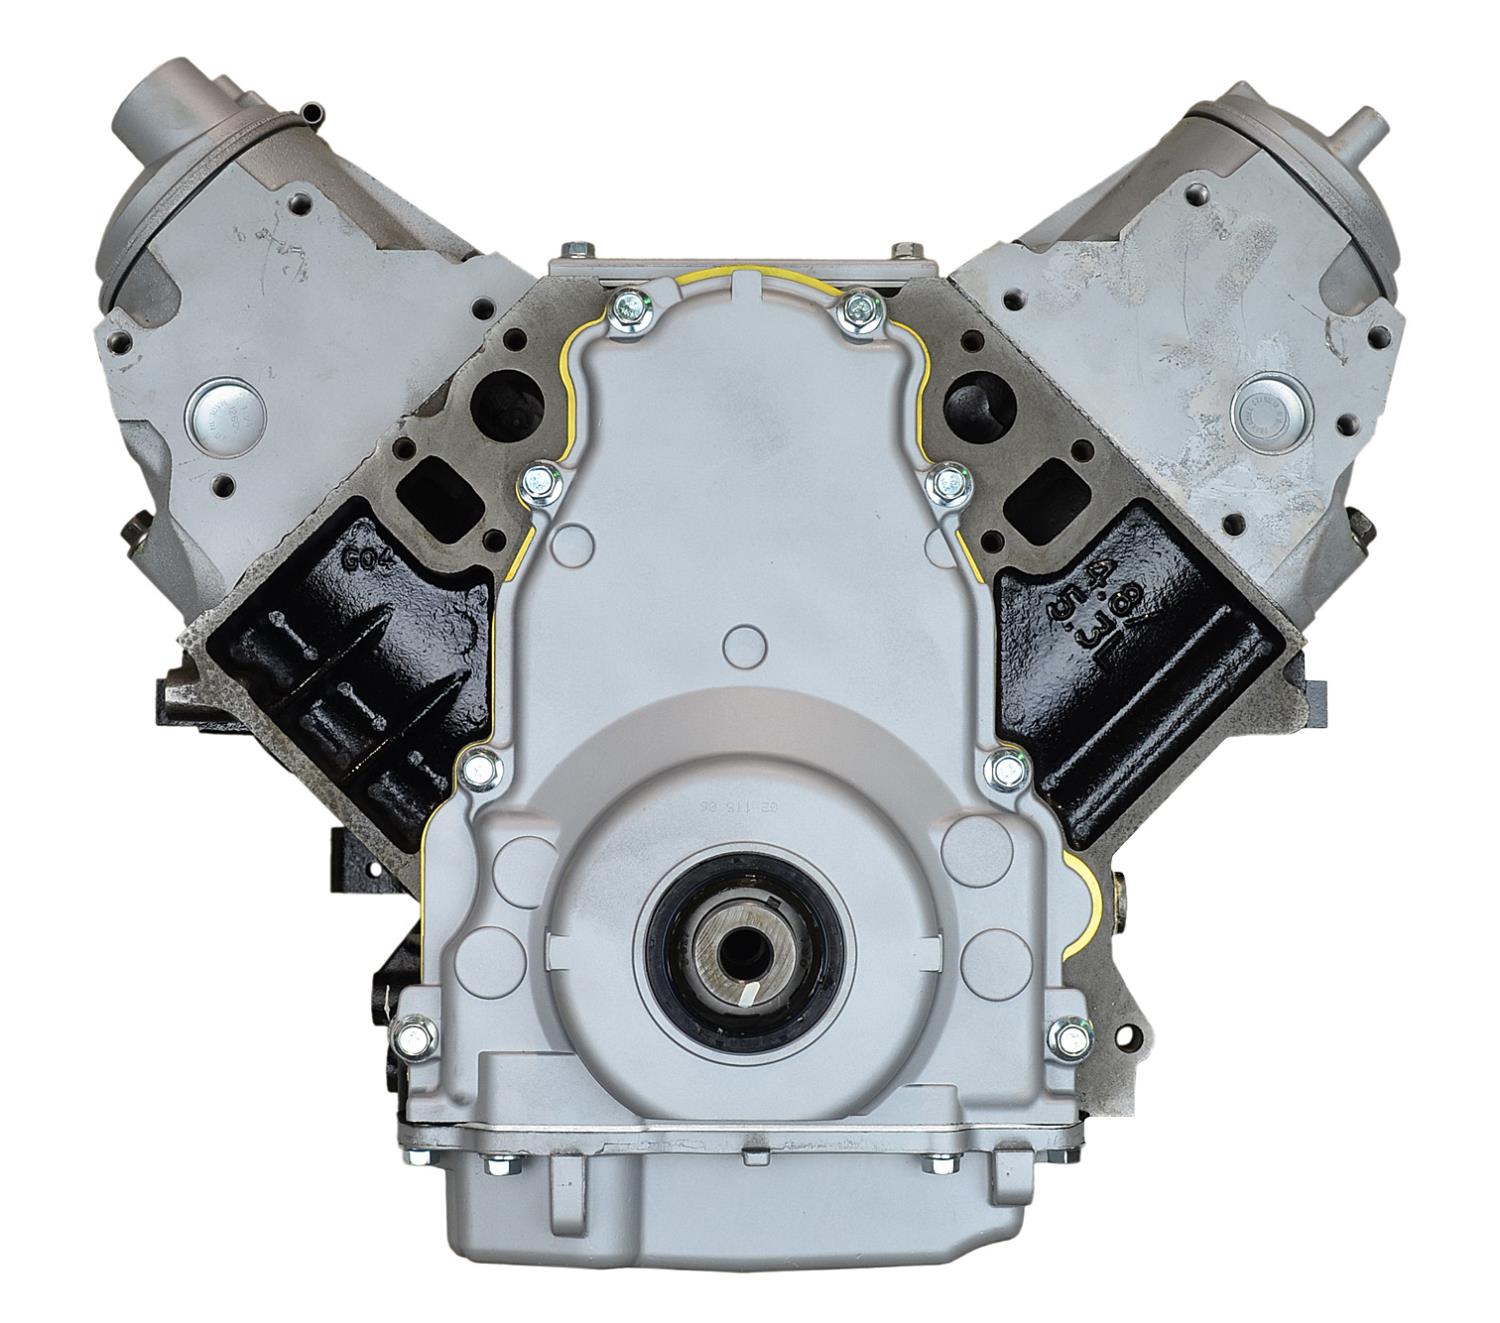 VCT84WD Remanufactured Crate Engine for 1999-2007 Chevy/GMC Truck, SUV, & Van with 5.3L V8